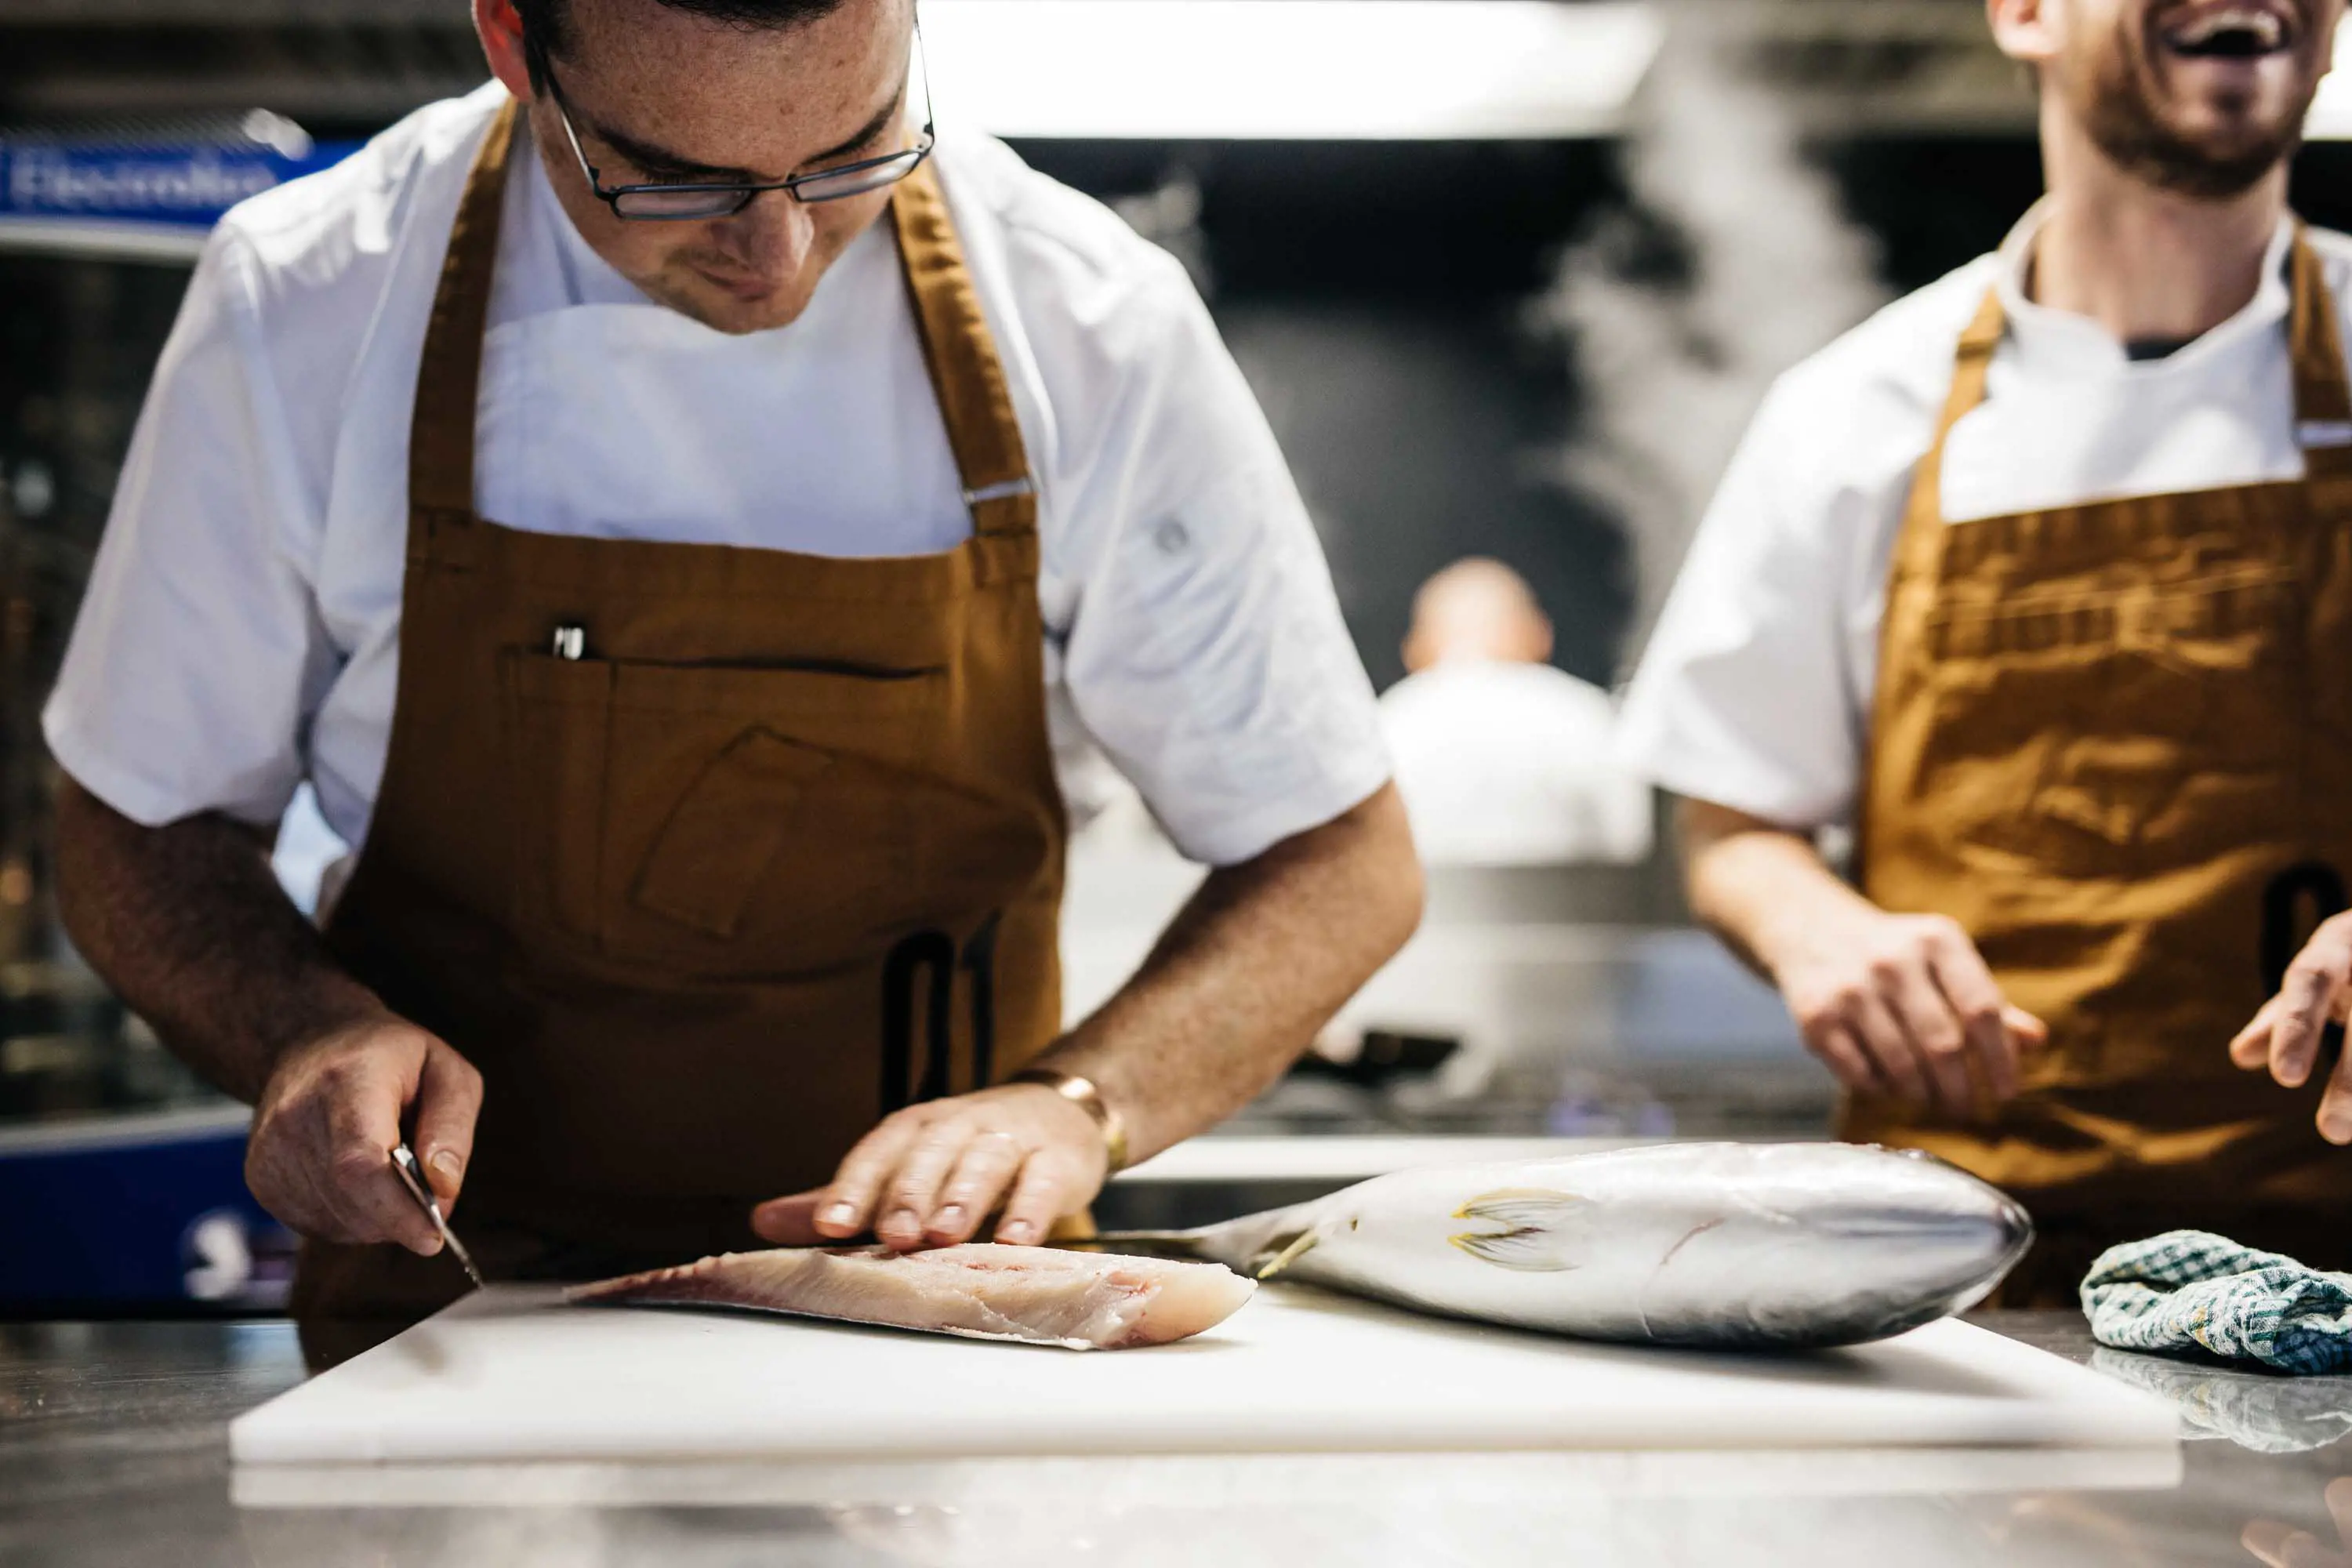 Two chefs work in the stainless steel kitchen. One slices fresh fish on a white plastic cutting board. 